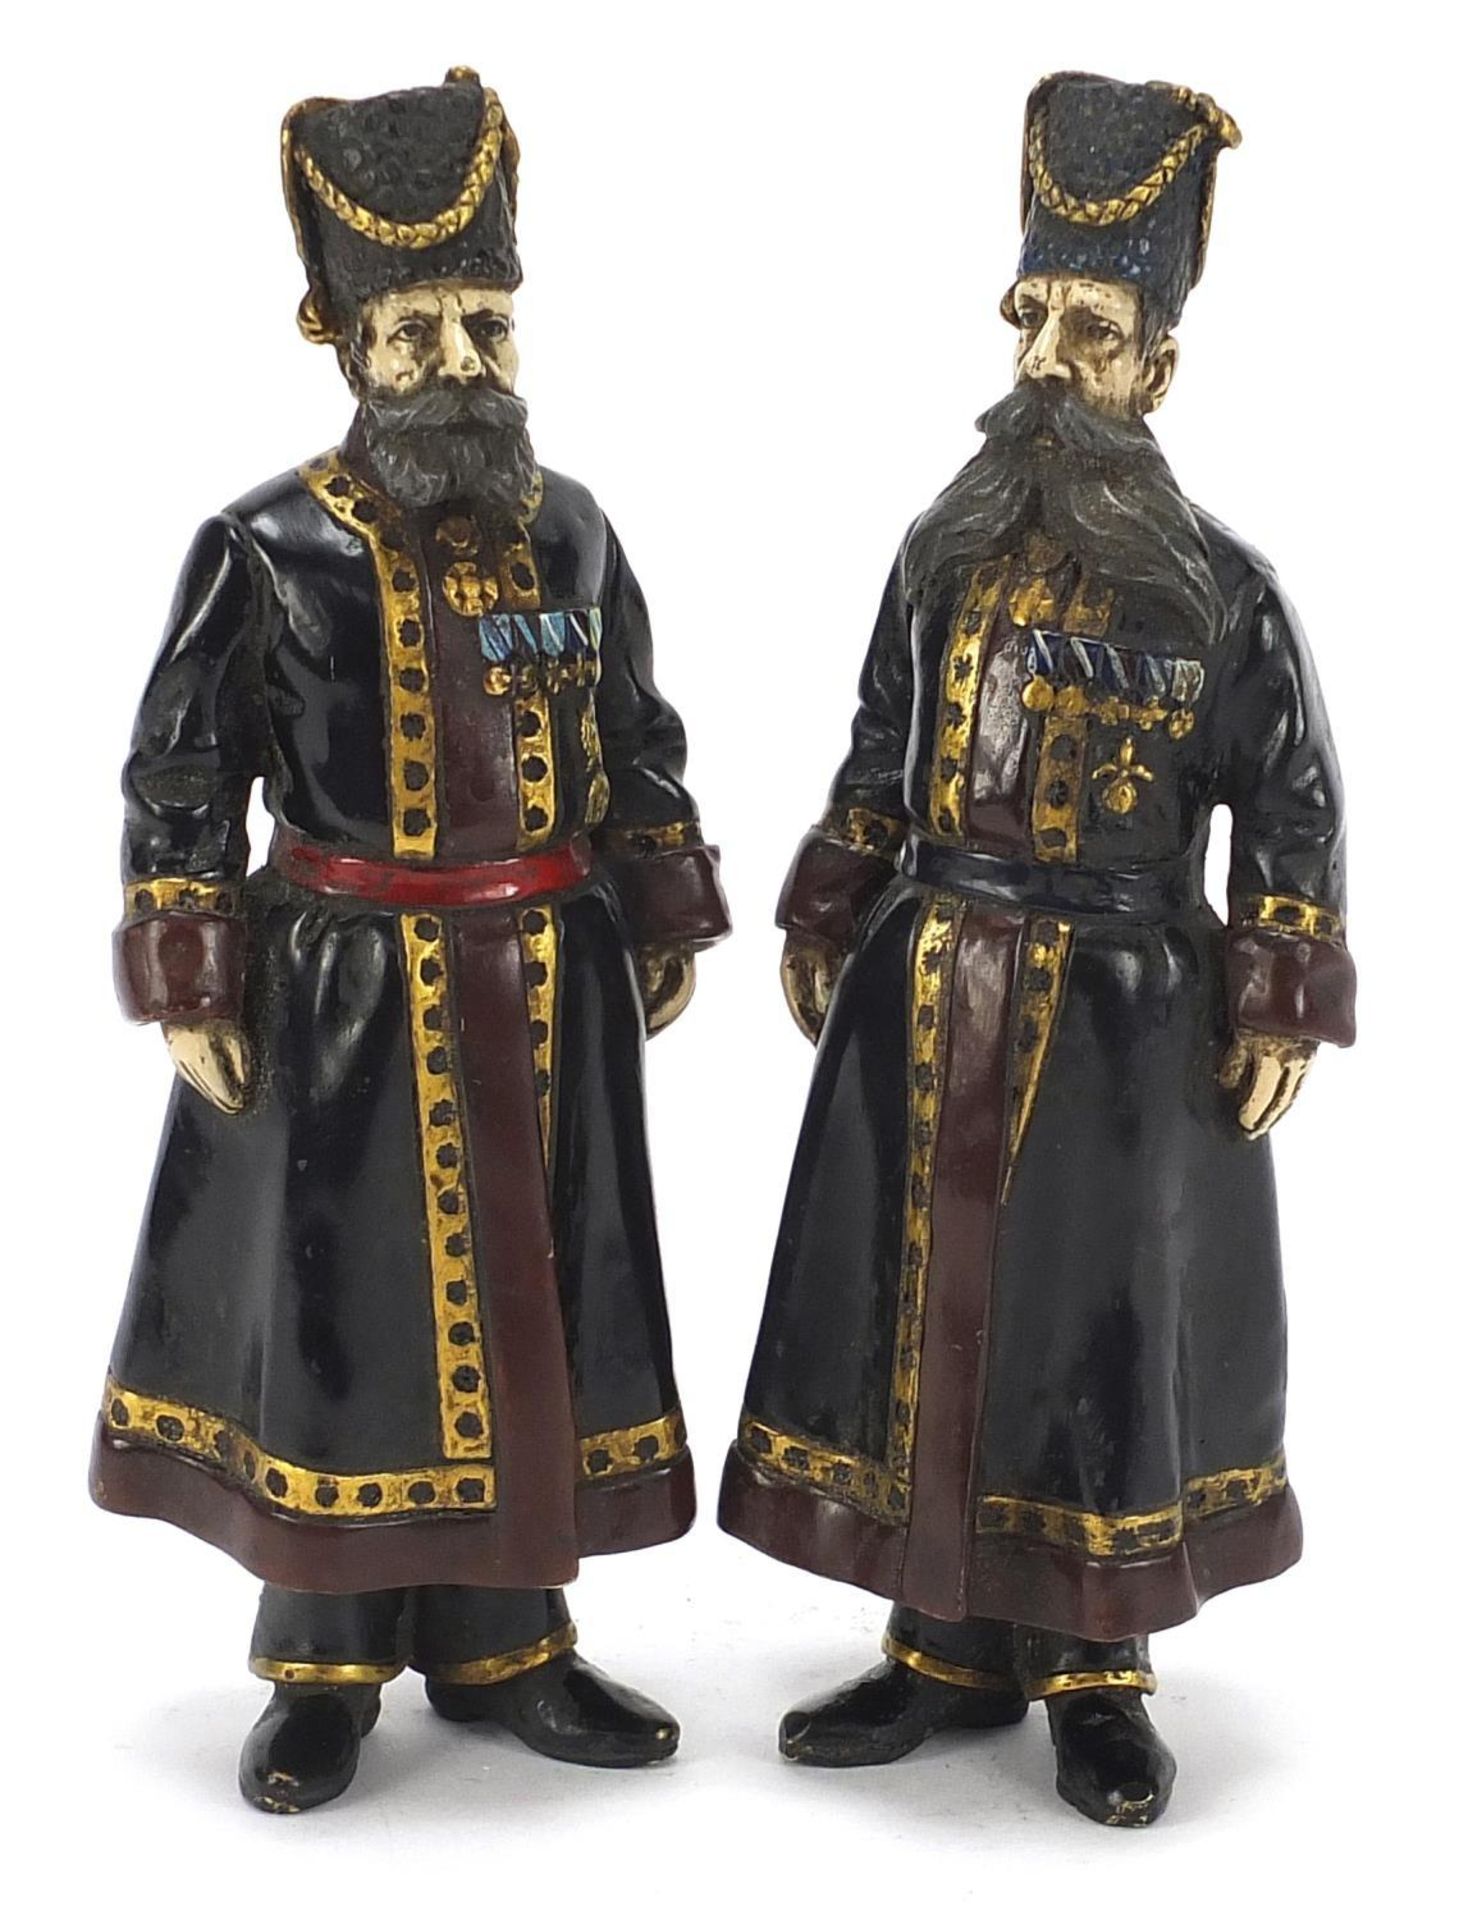 Pair of cold painted bronze figures of Russian officers in military dress, each approximately 18cm